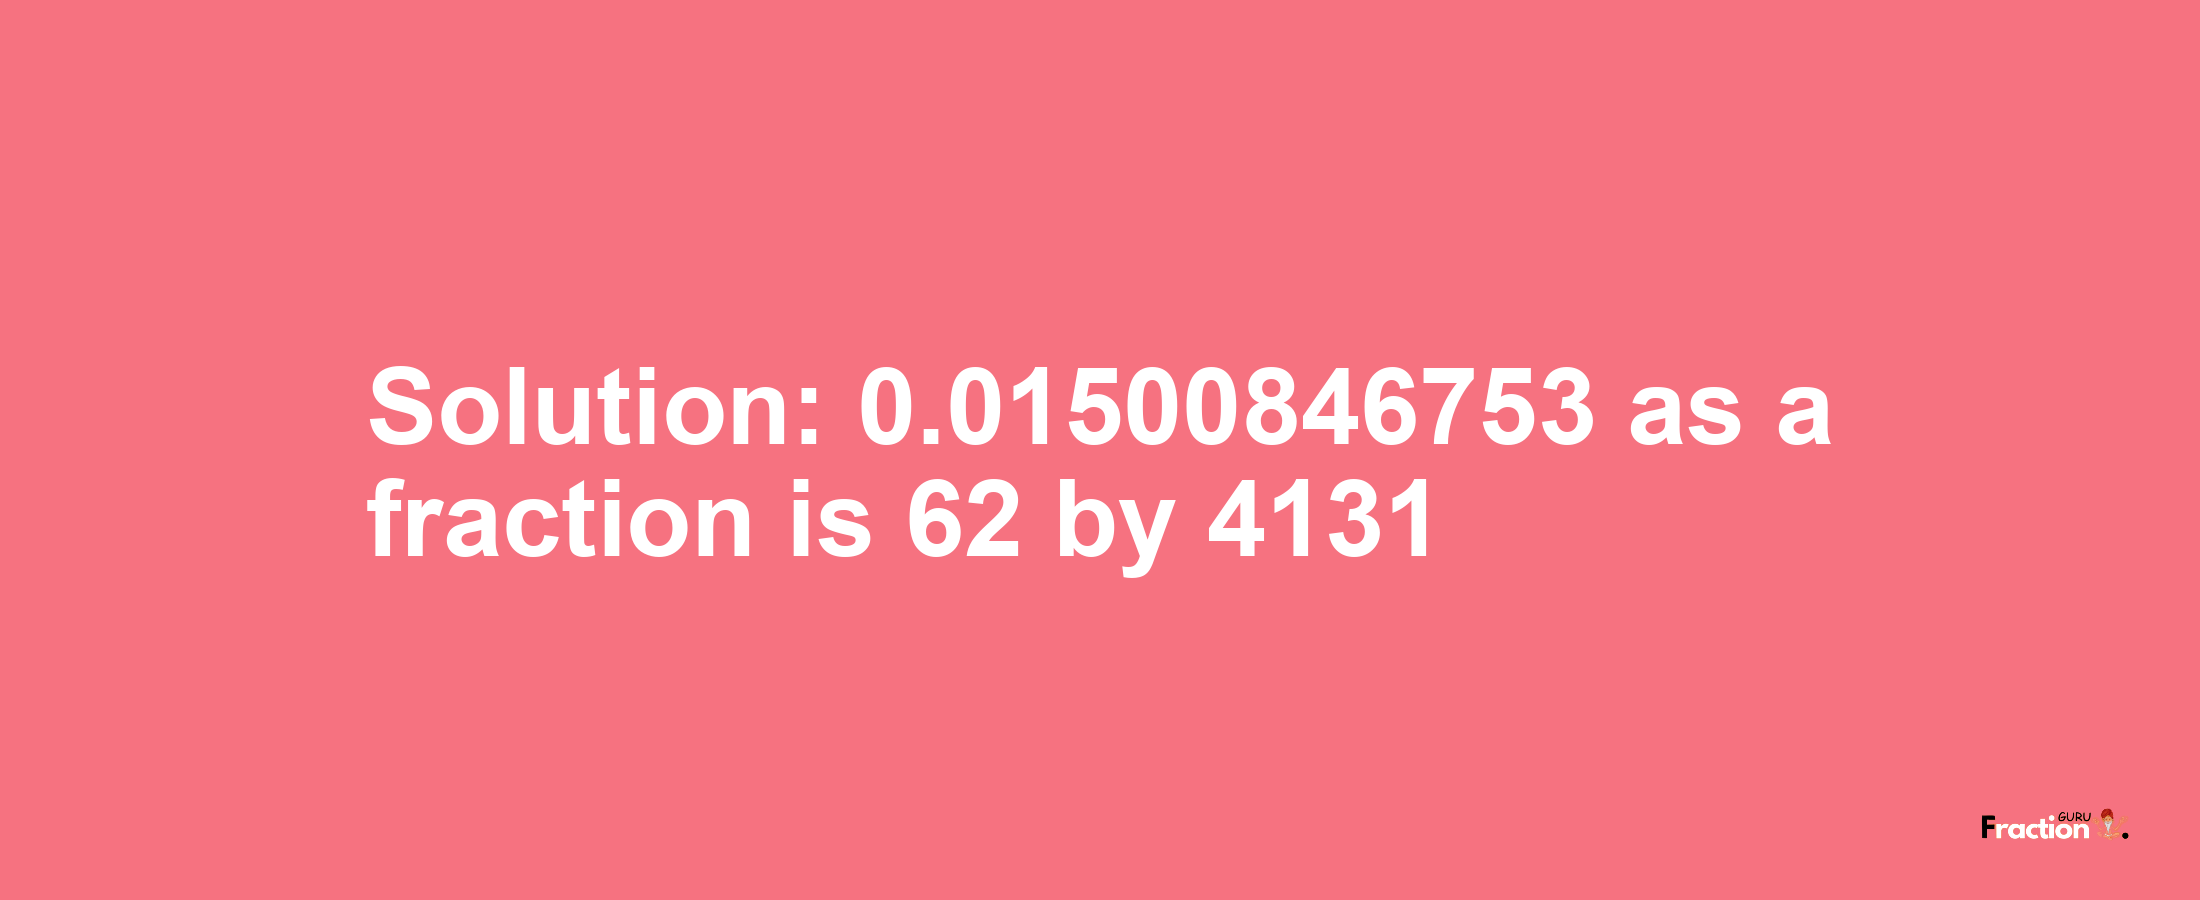 Solution:0.01500846753 as a fraction is 62/4131